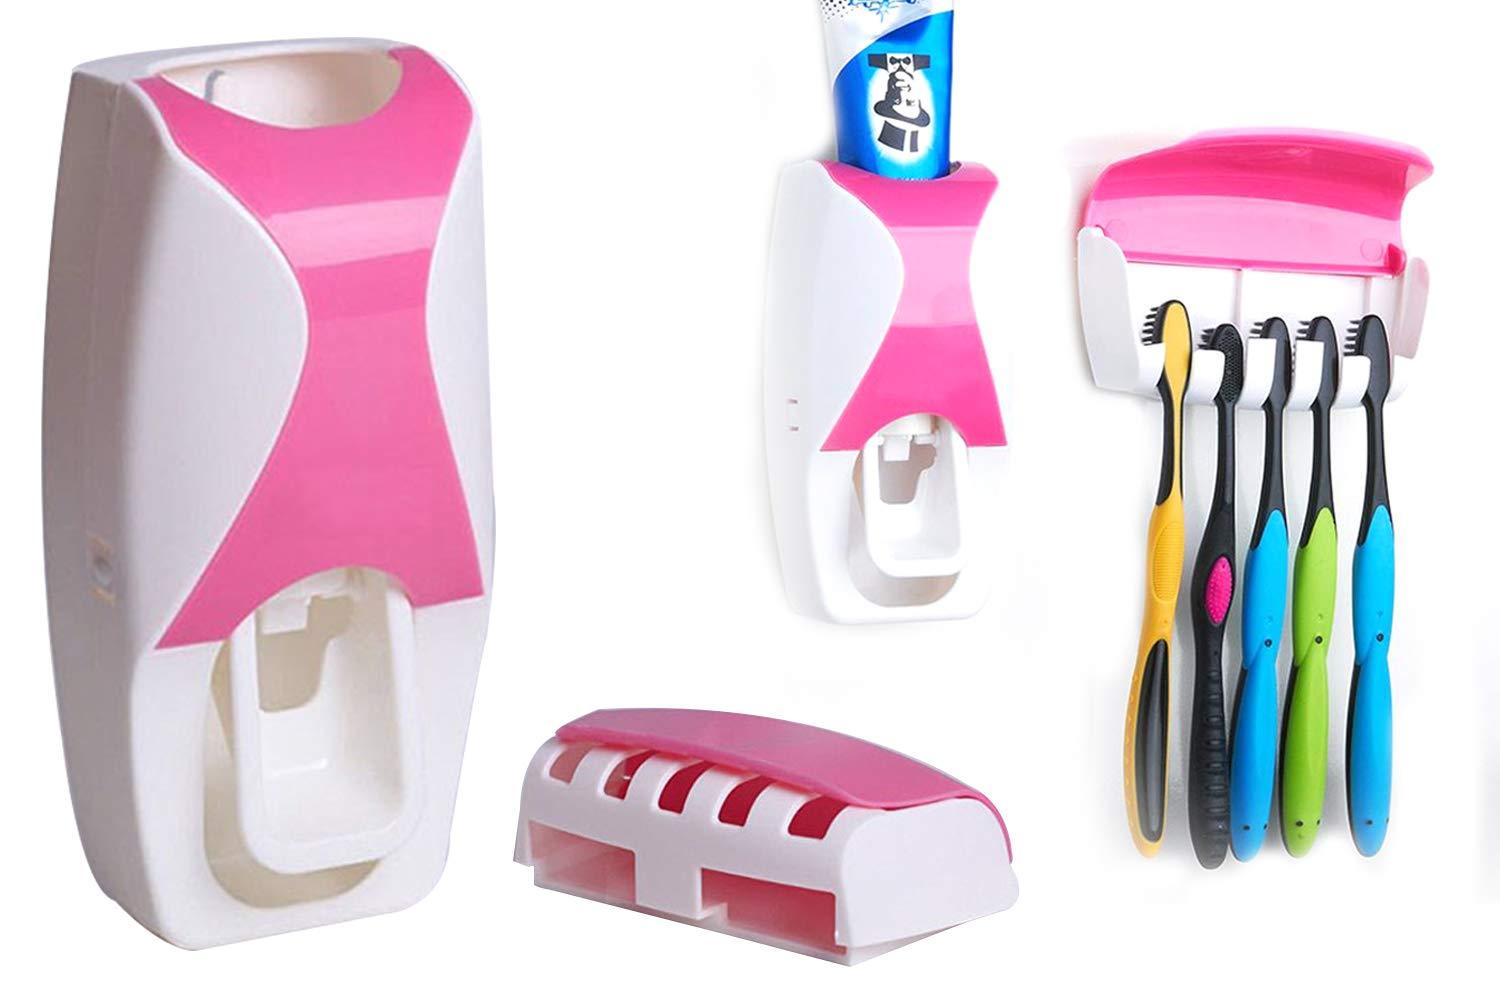 200 Toothpaste Dispenser & Tooth Brush with Toothbrush JK Trends